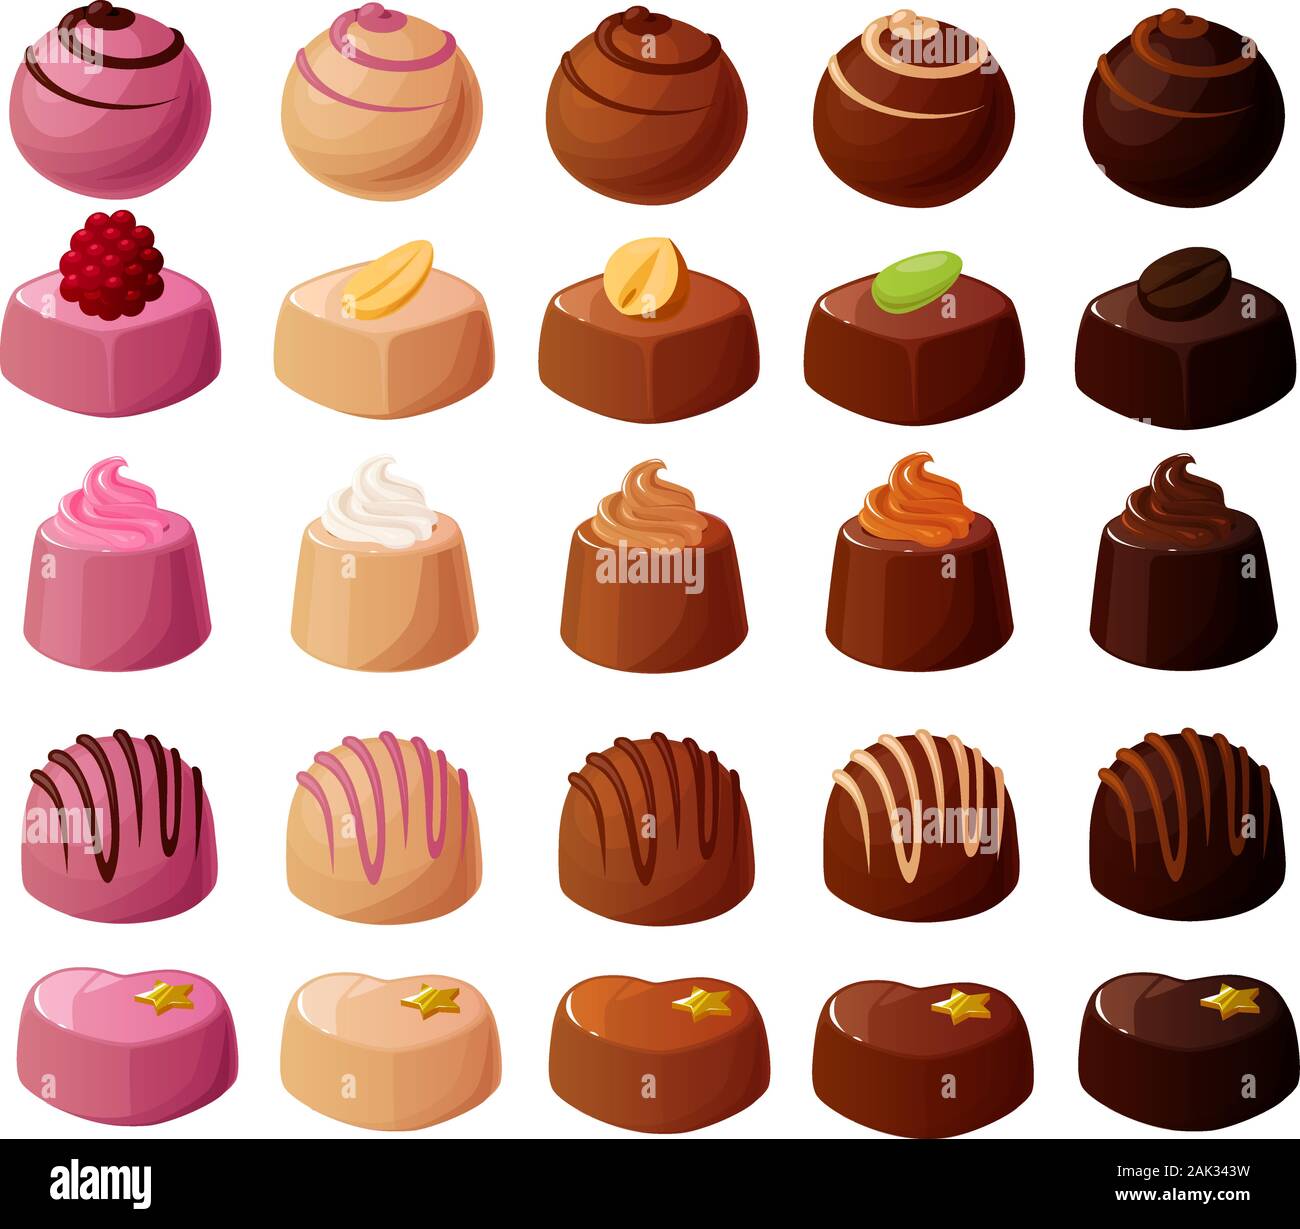 Vector illustration of various kinds of filled chocolate truffles, pralines and bonbons isolated on a white background Stock Vector